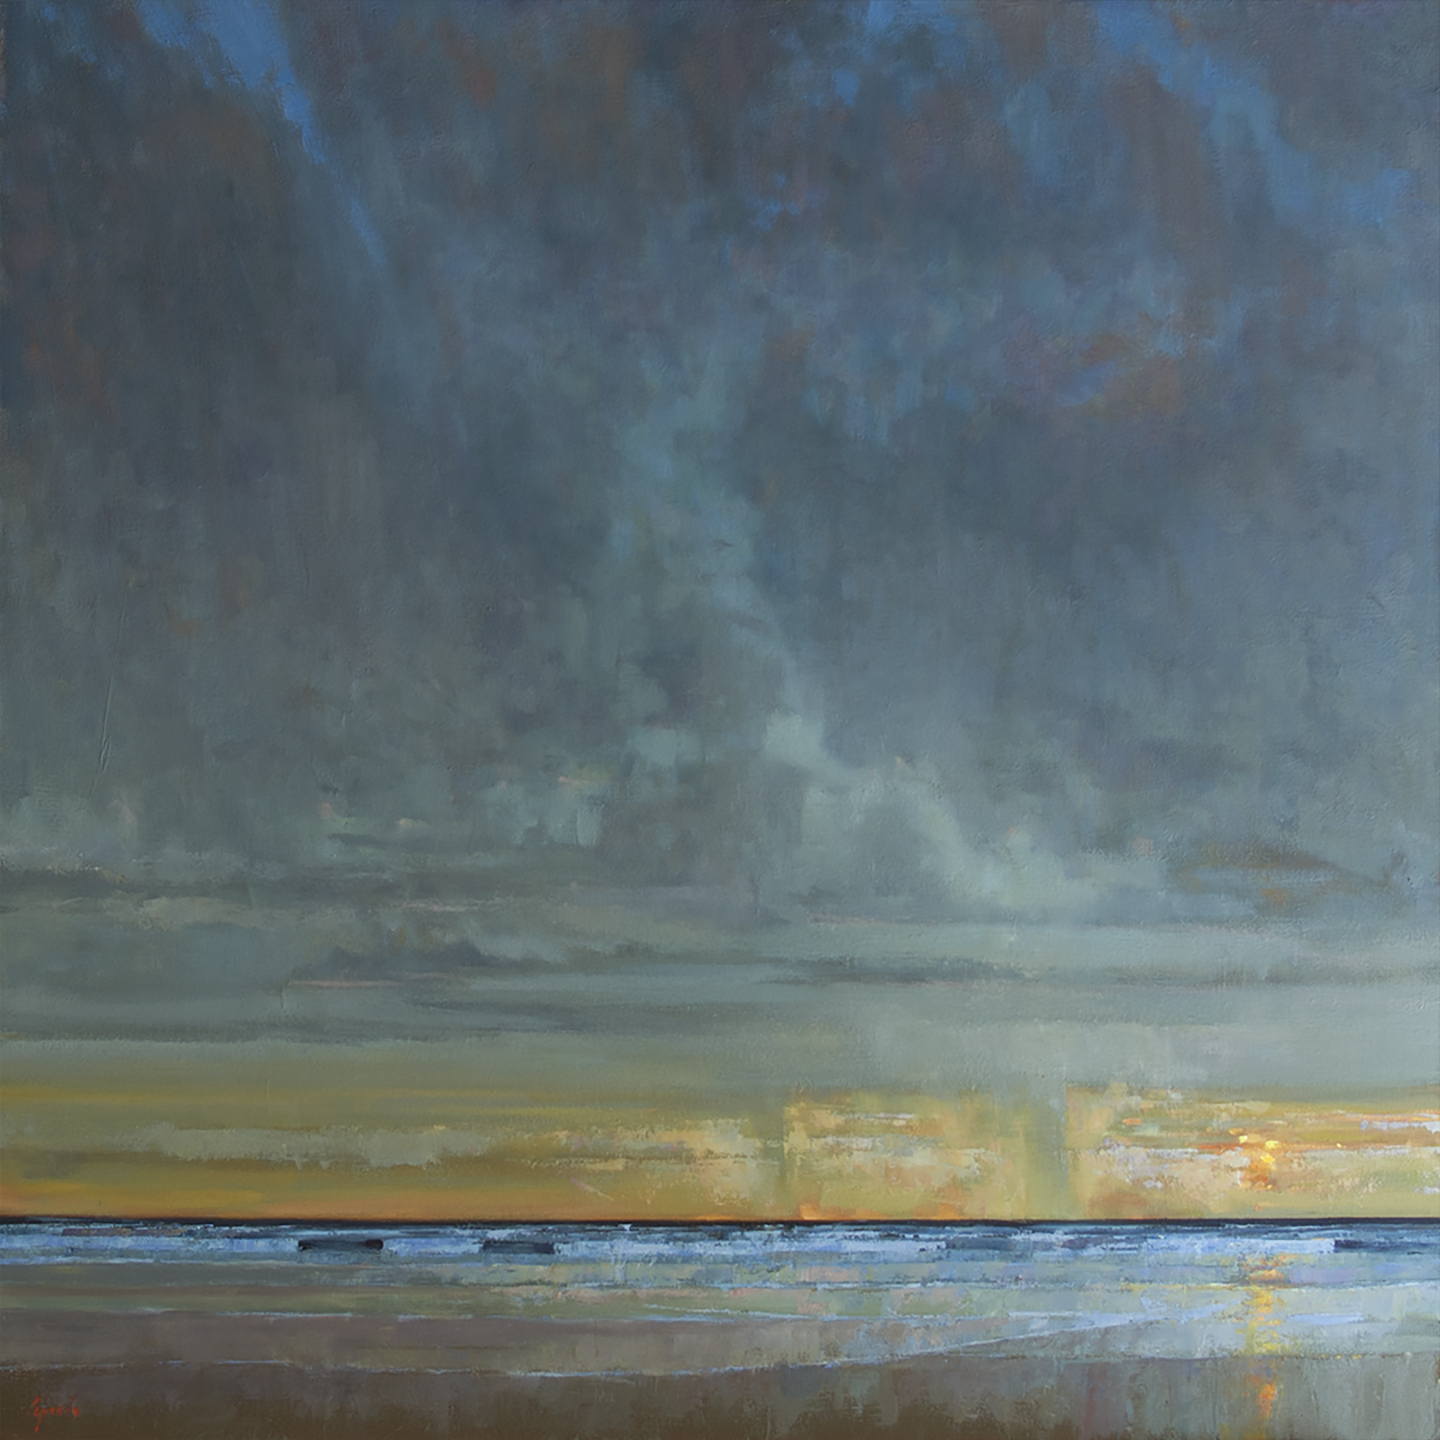 Rolling Over Long Beach' 48 X 48 in. oil on canvas - - The Avenue Gallery